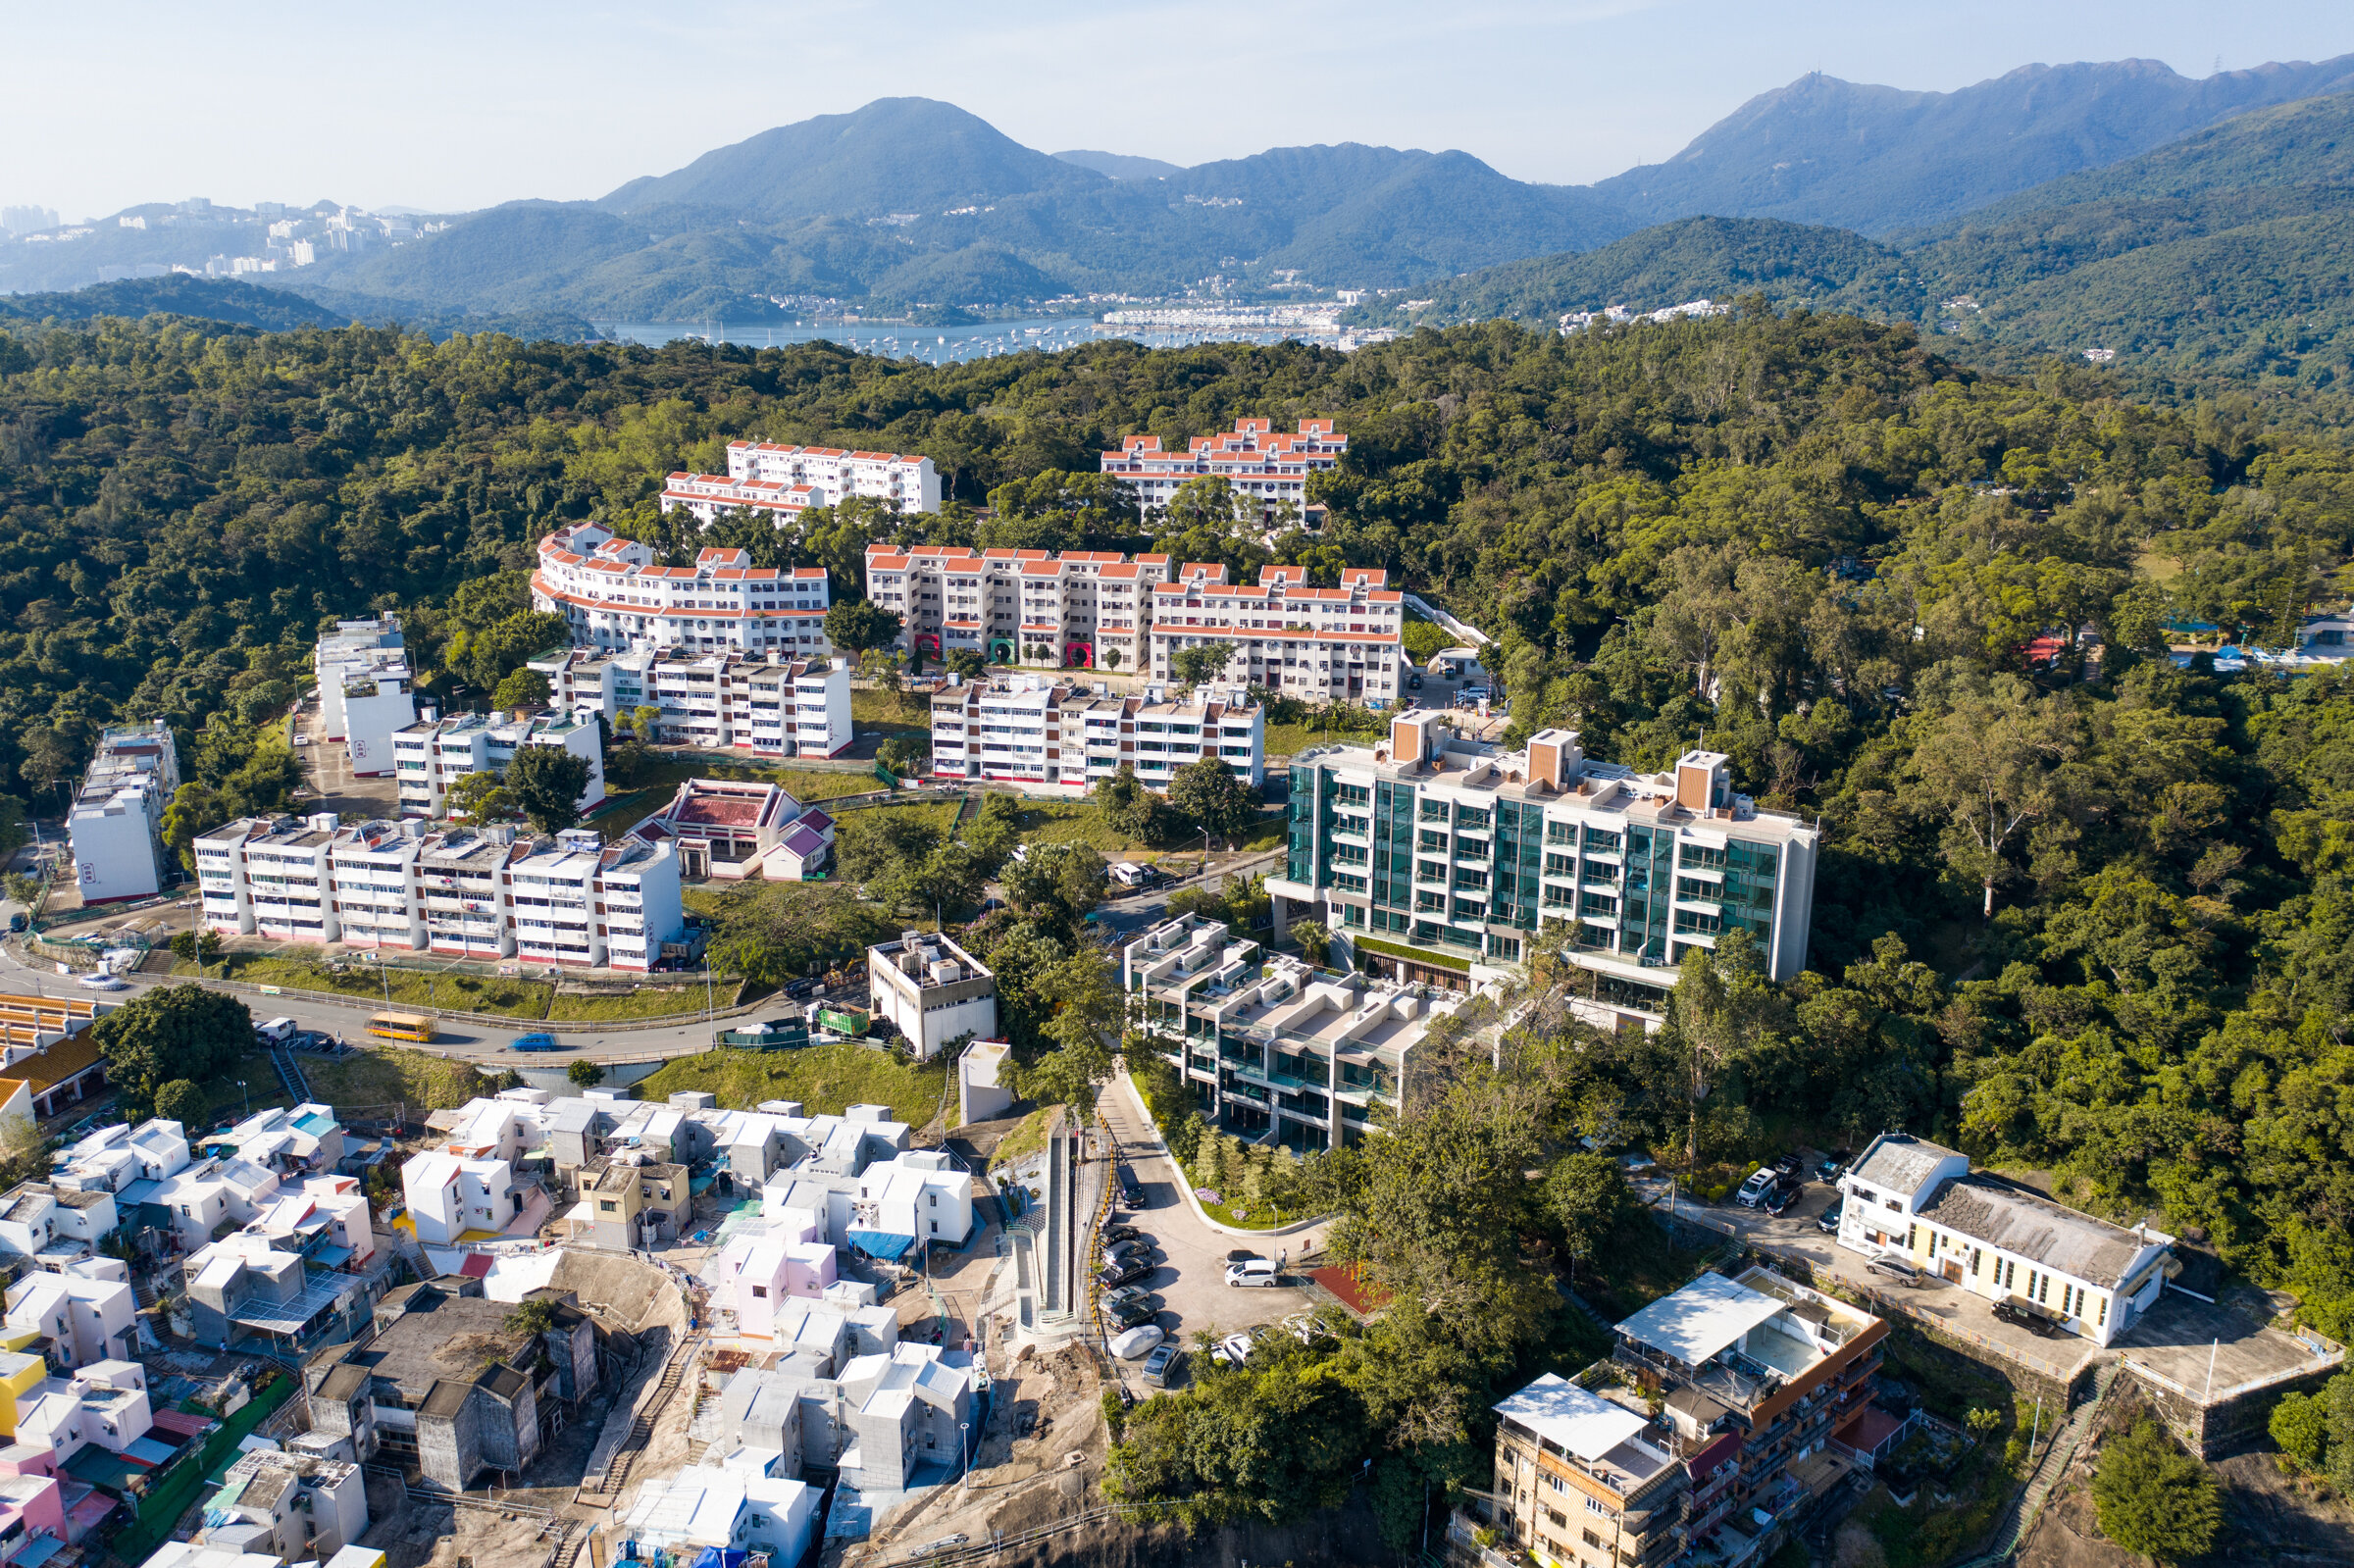  133 Portofino Sai Kung, Hong Kong  Developed / Photographed for Sino Group Clubhouse design by via. 